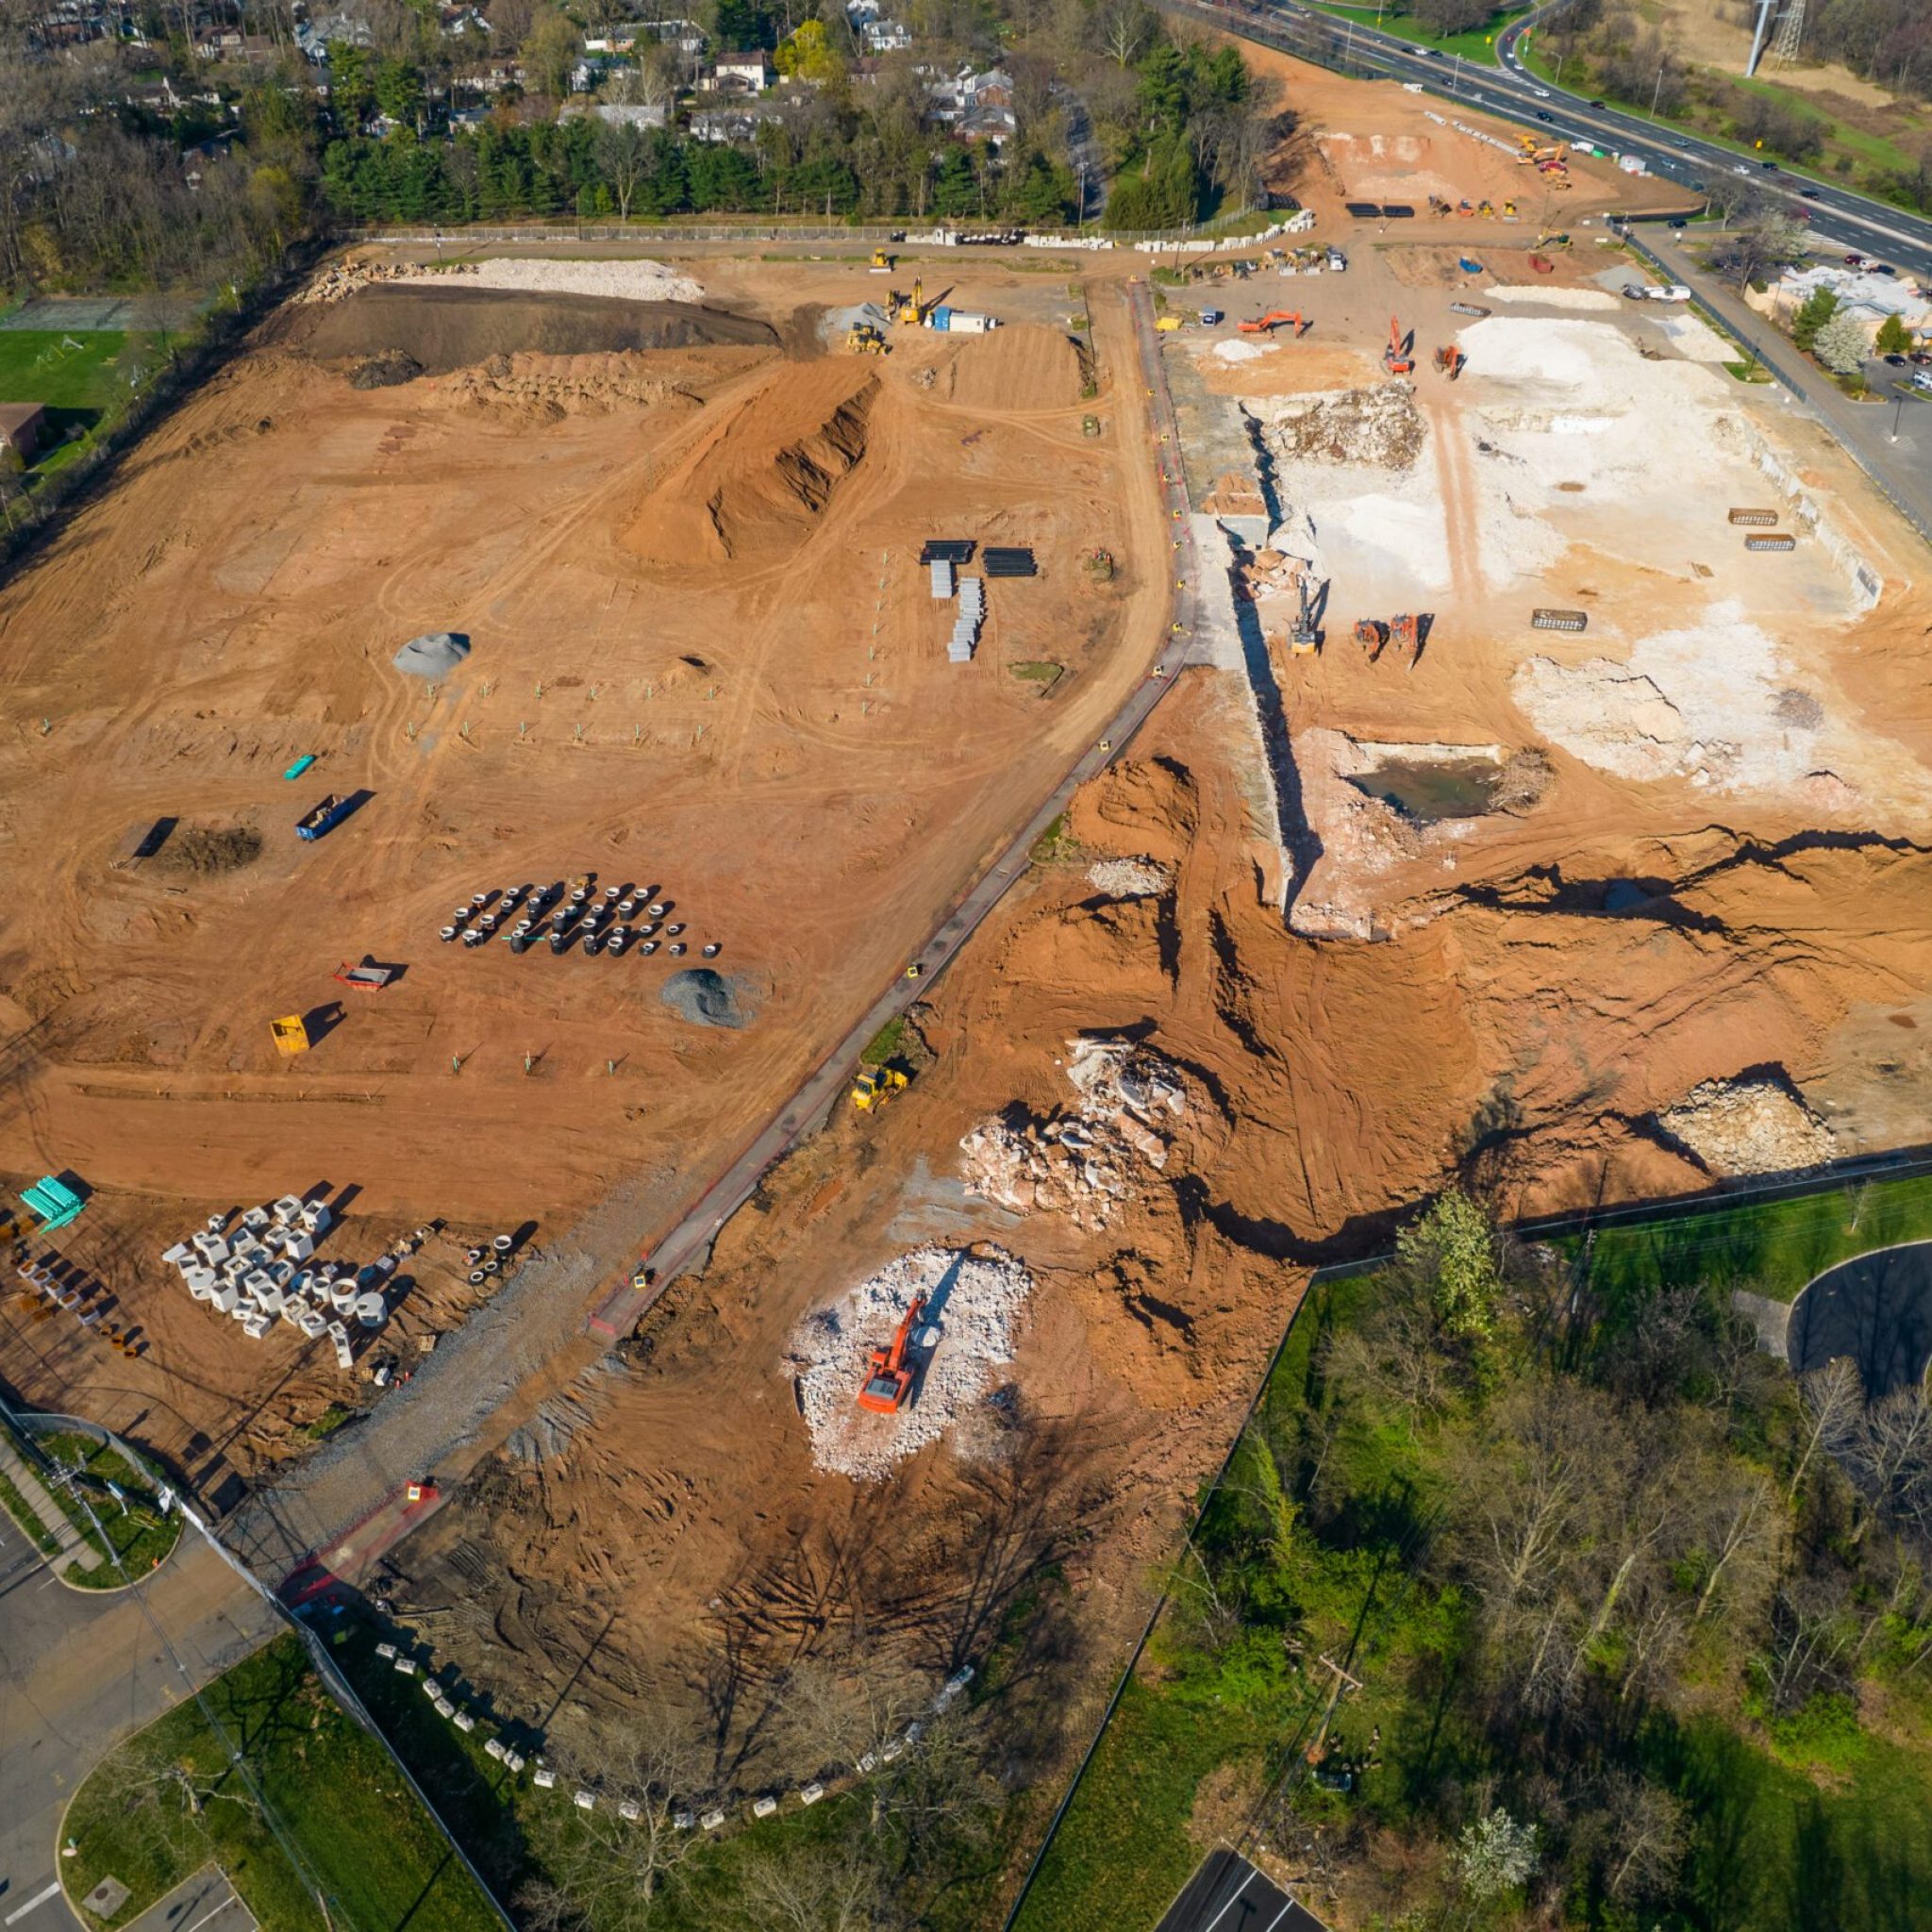 Construction site excavation from a drone view